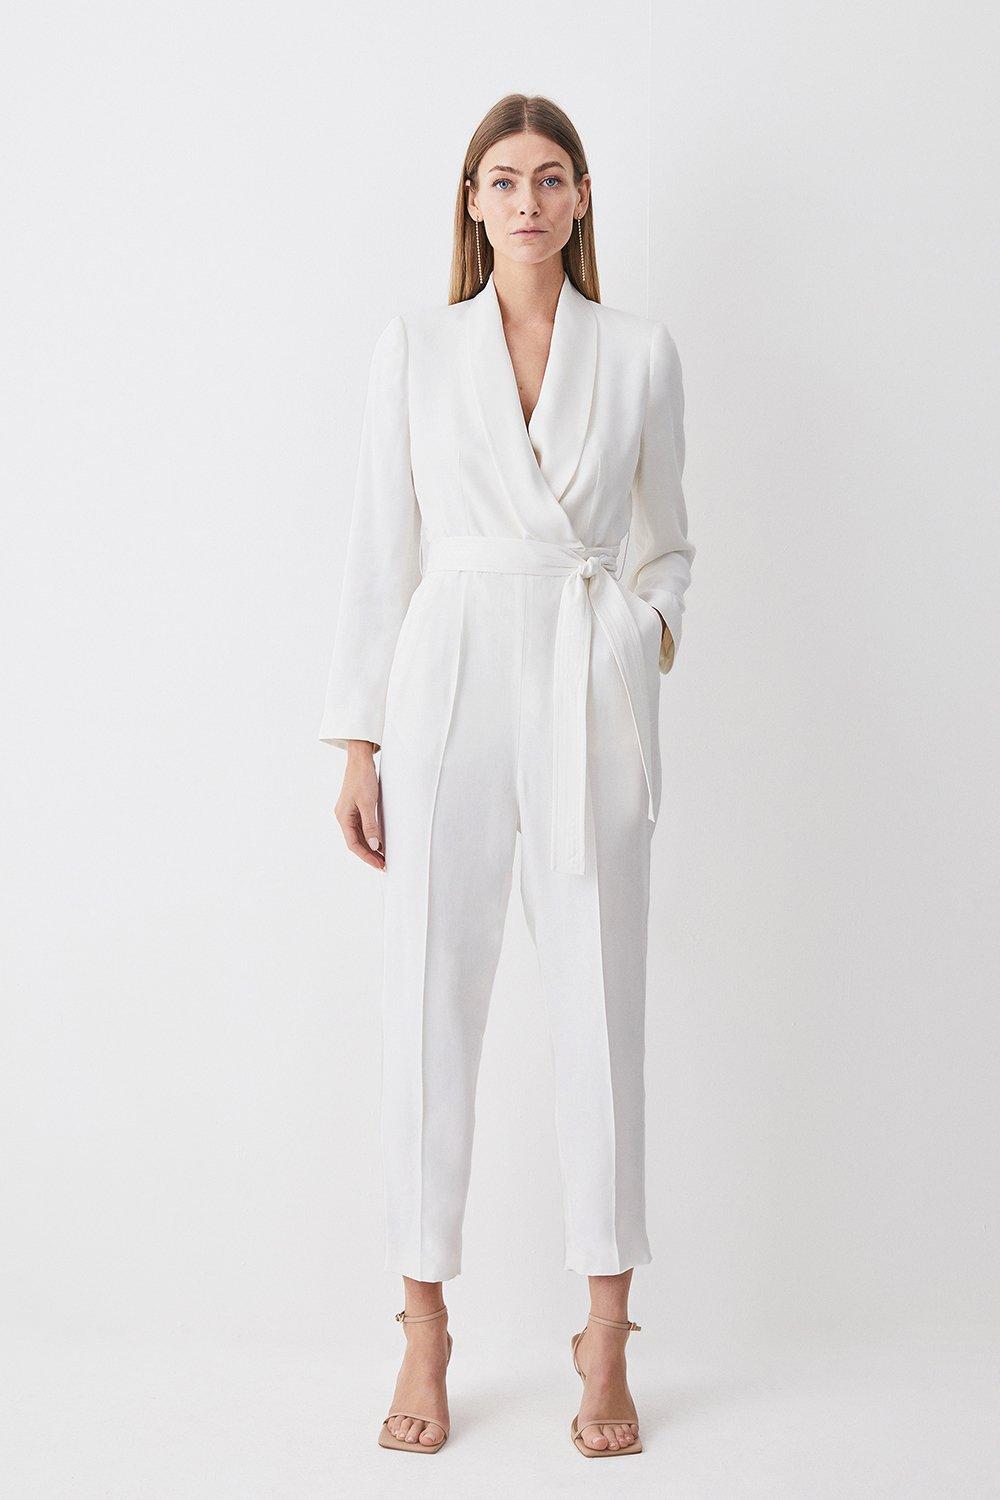 What Shoes to Wear with a Jumpsuit From Formal to Casual